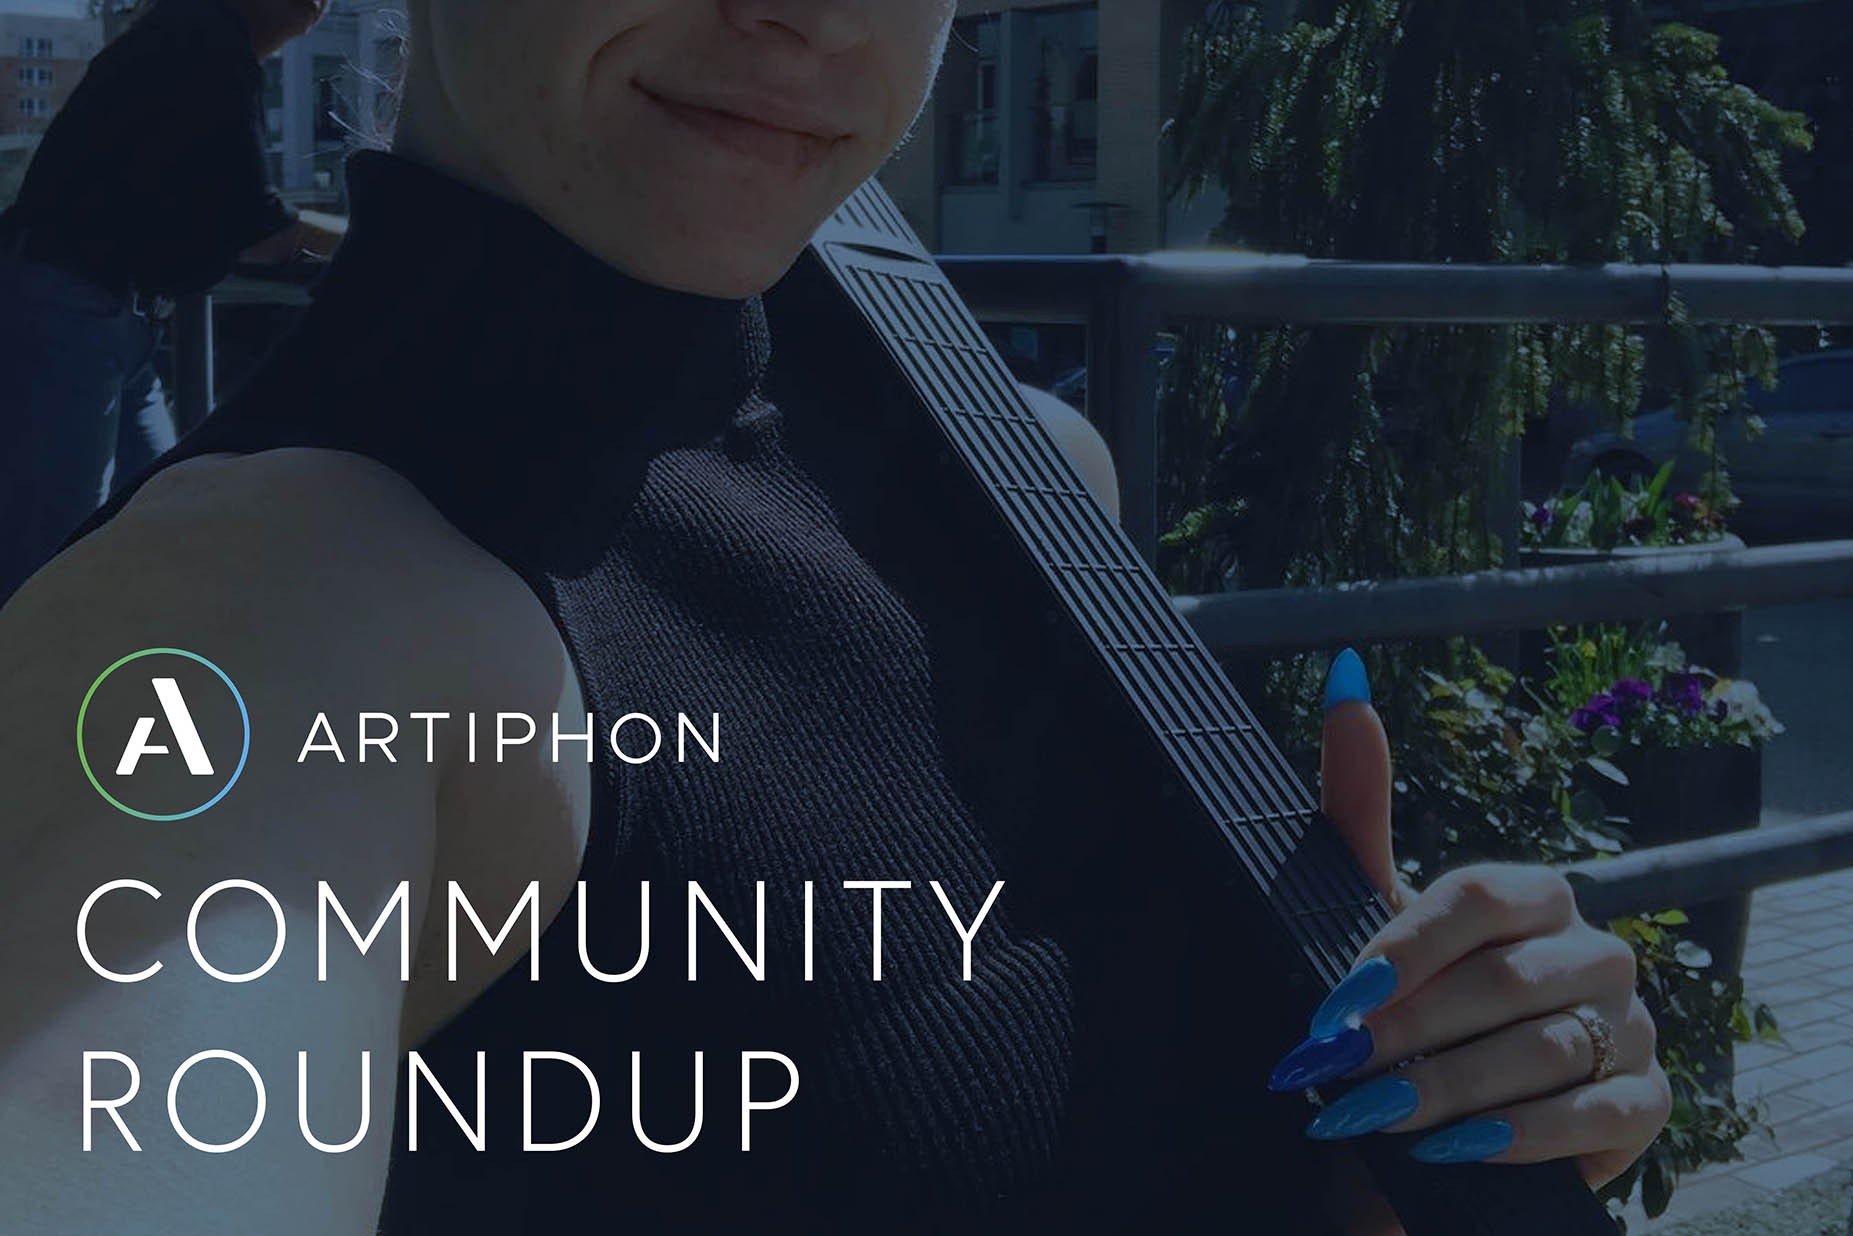 It's the Artiphon Community Roundup for Spring 2019!